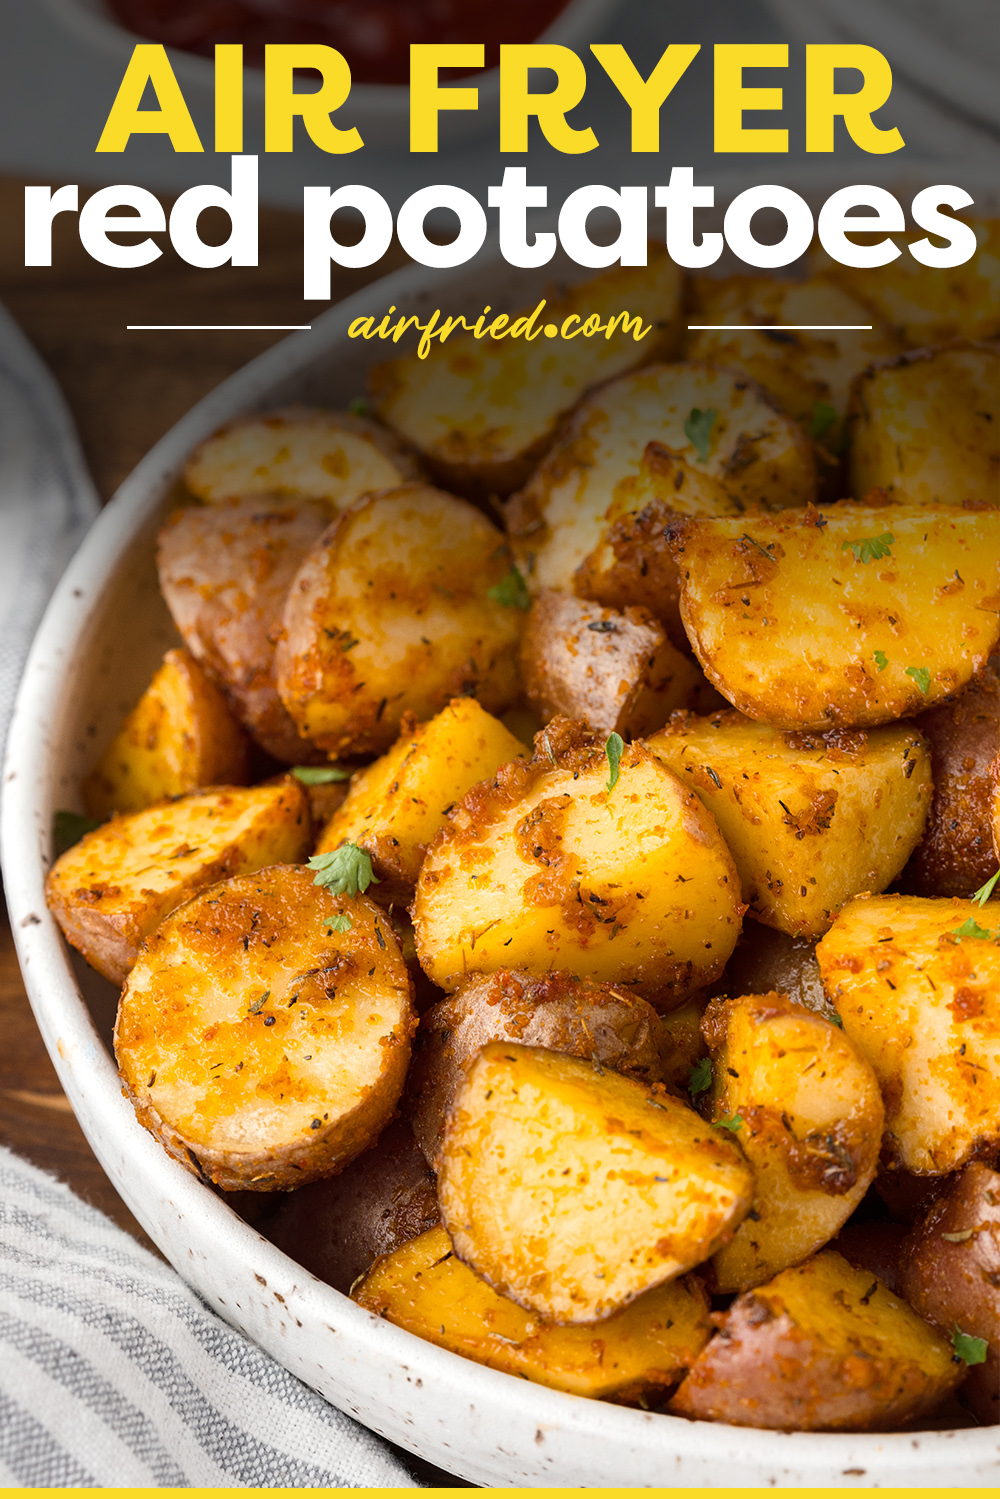 These fluffy red potatoes are seasoned perfectly and roasted in our air fryer!